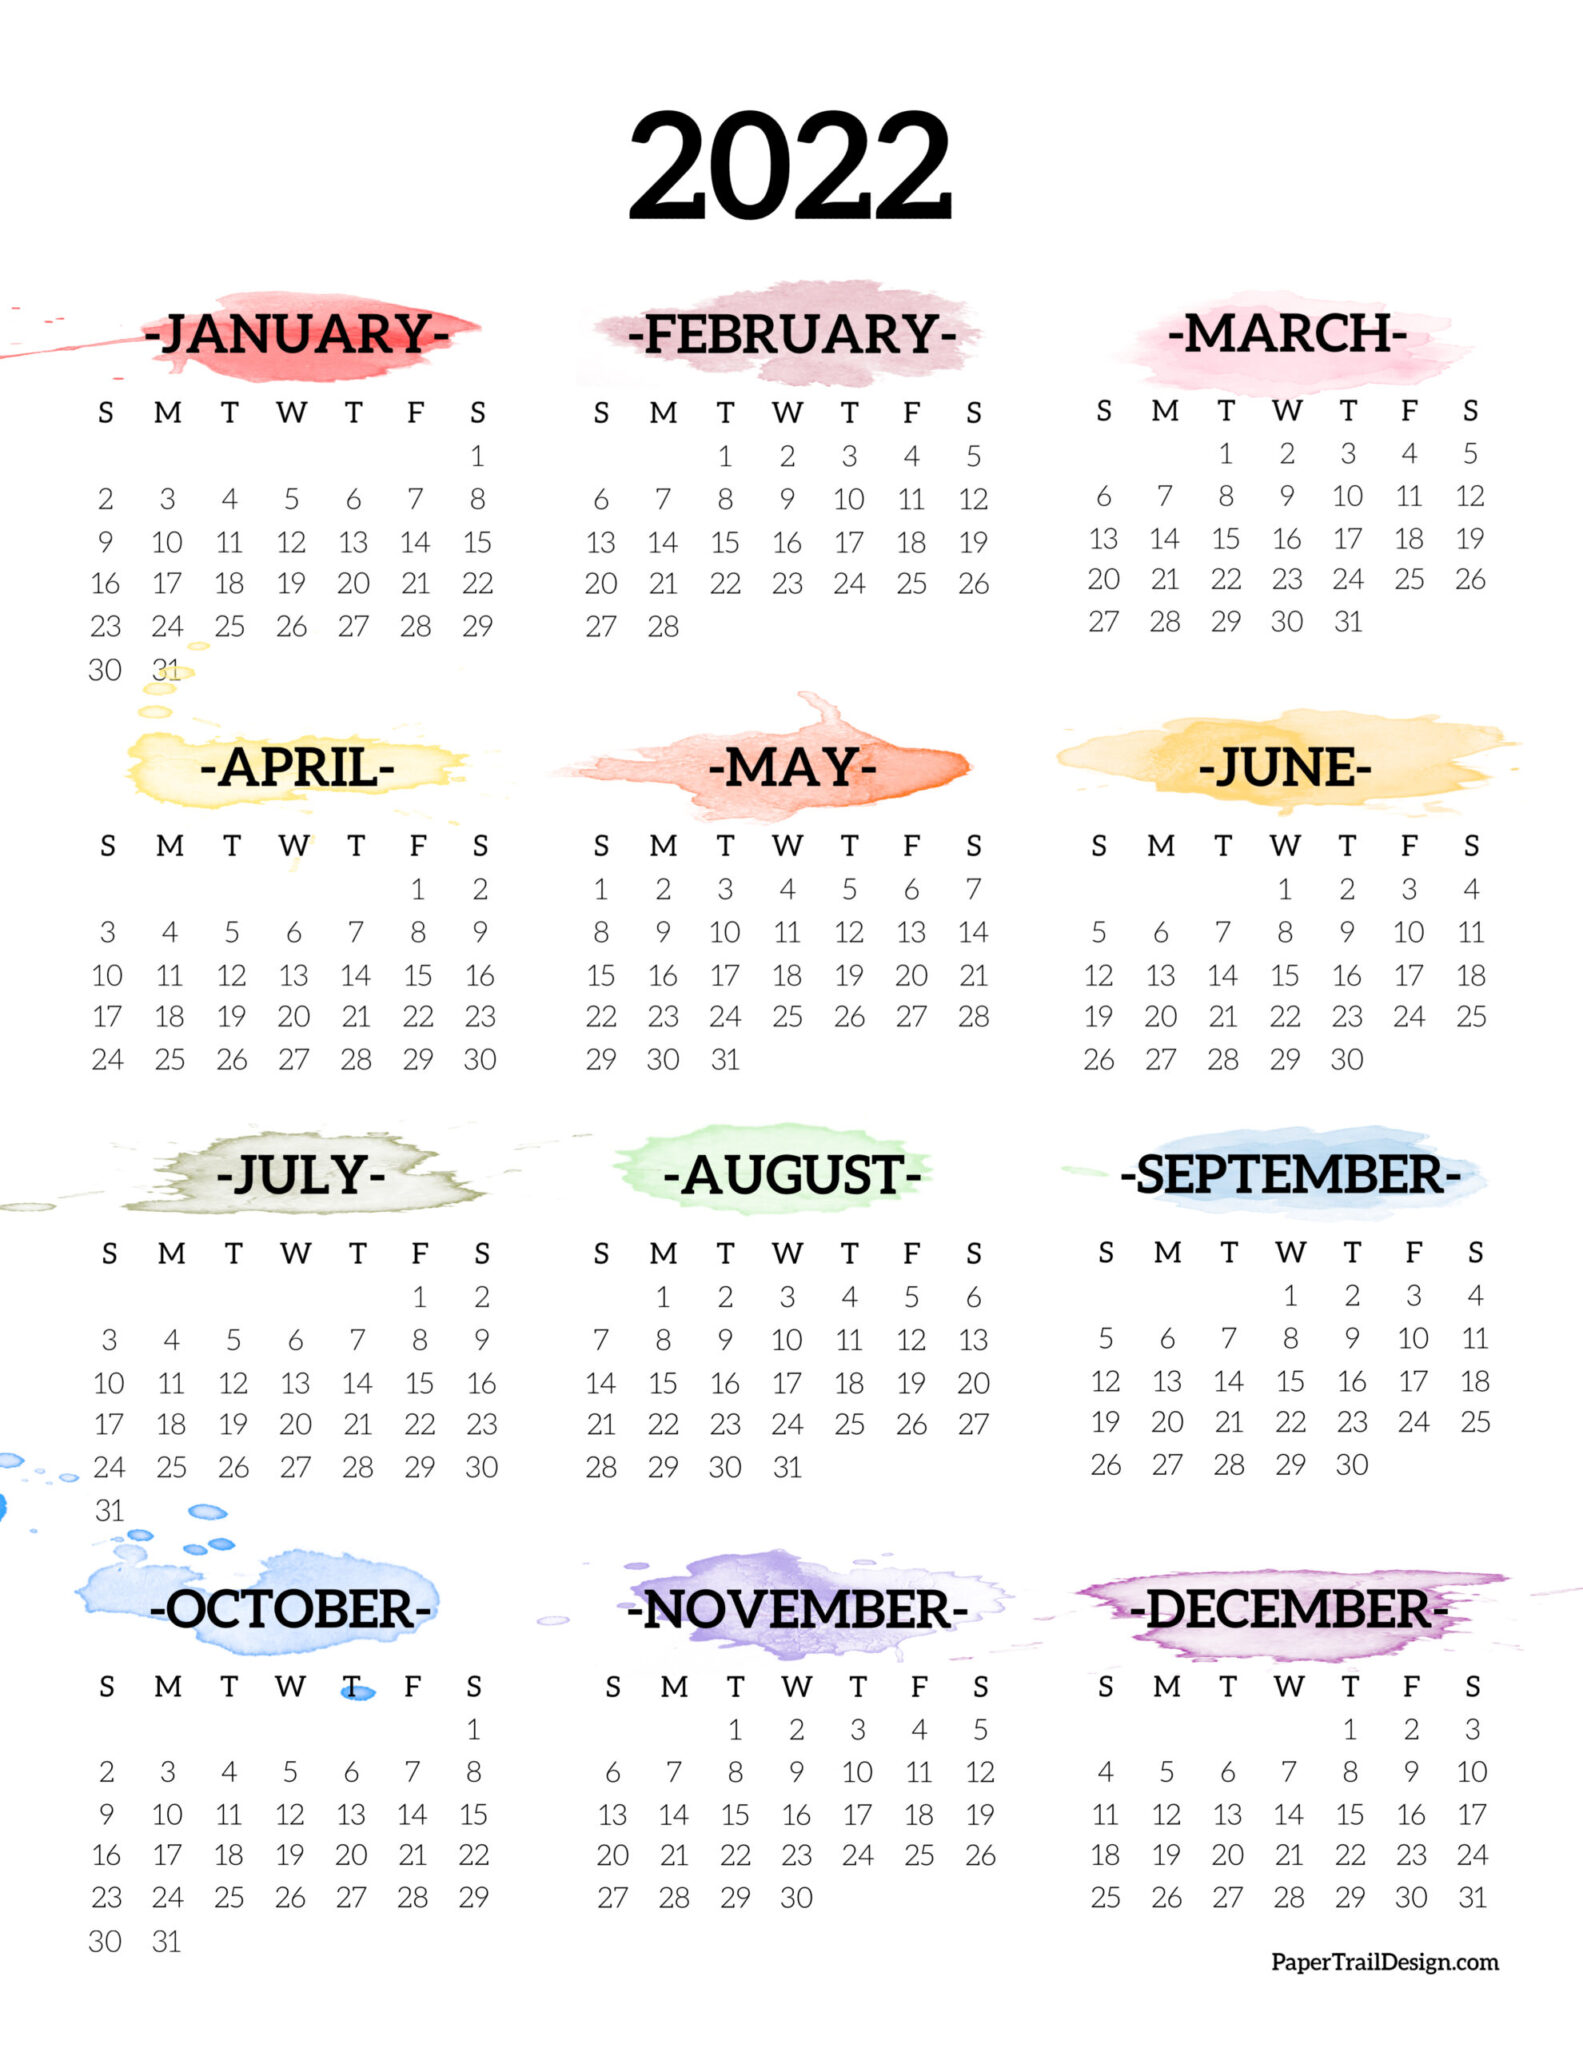 2022 one page calendar printable watercolor paper trail design